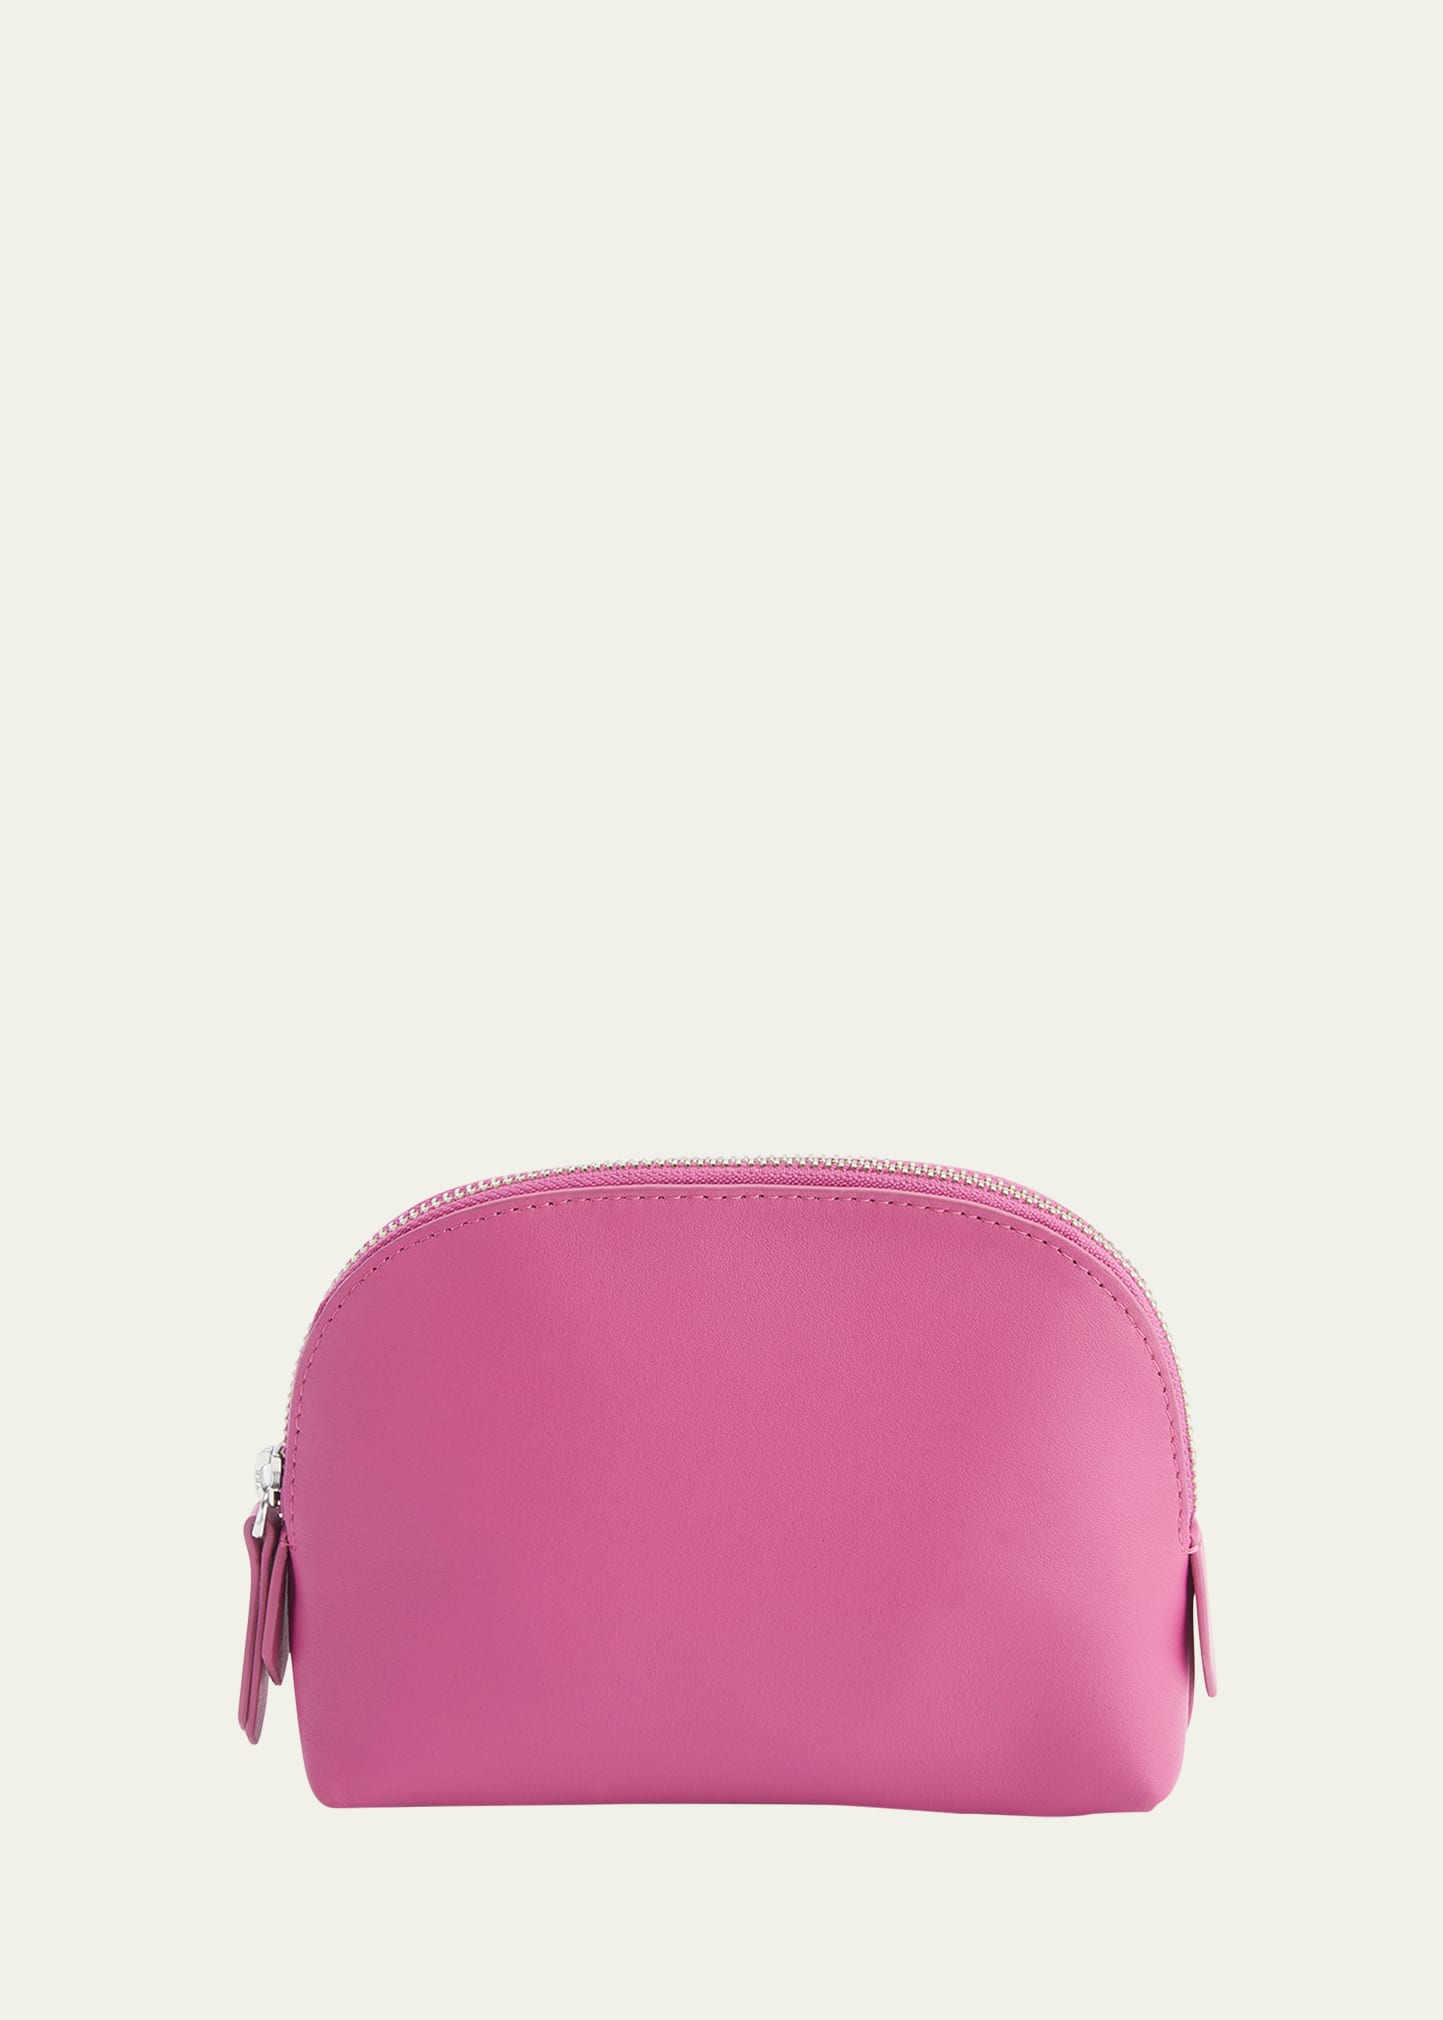 Royce New York Compact Cosmetic Bag In Bright Pink